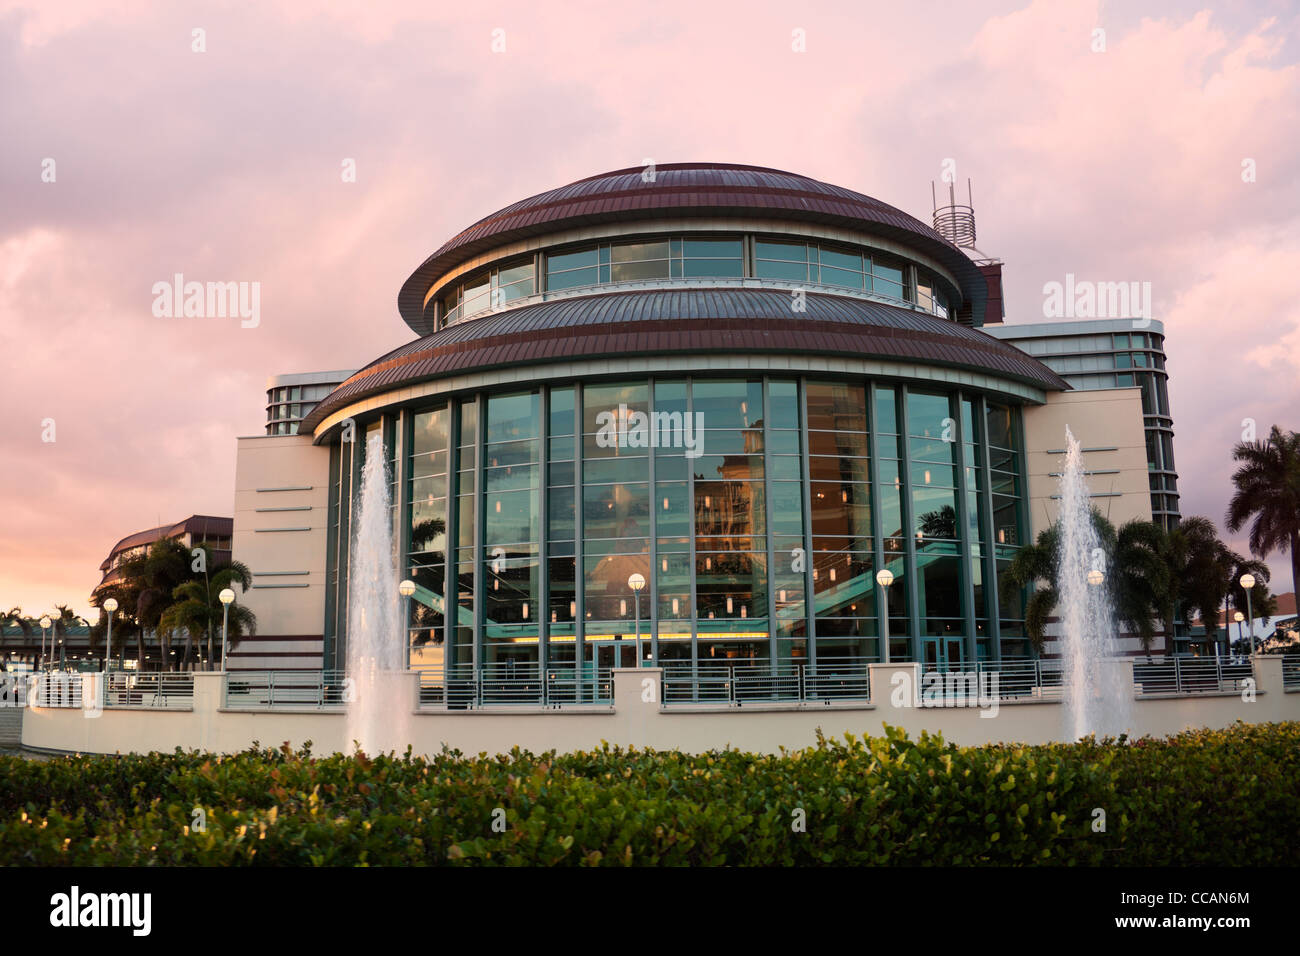 Architecture of West Palm Beach at sunset Stock Photo